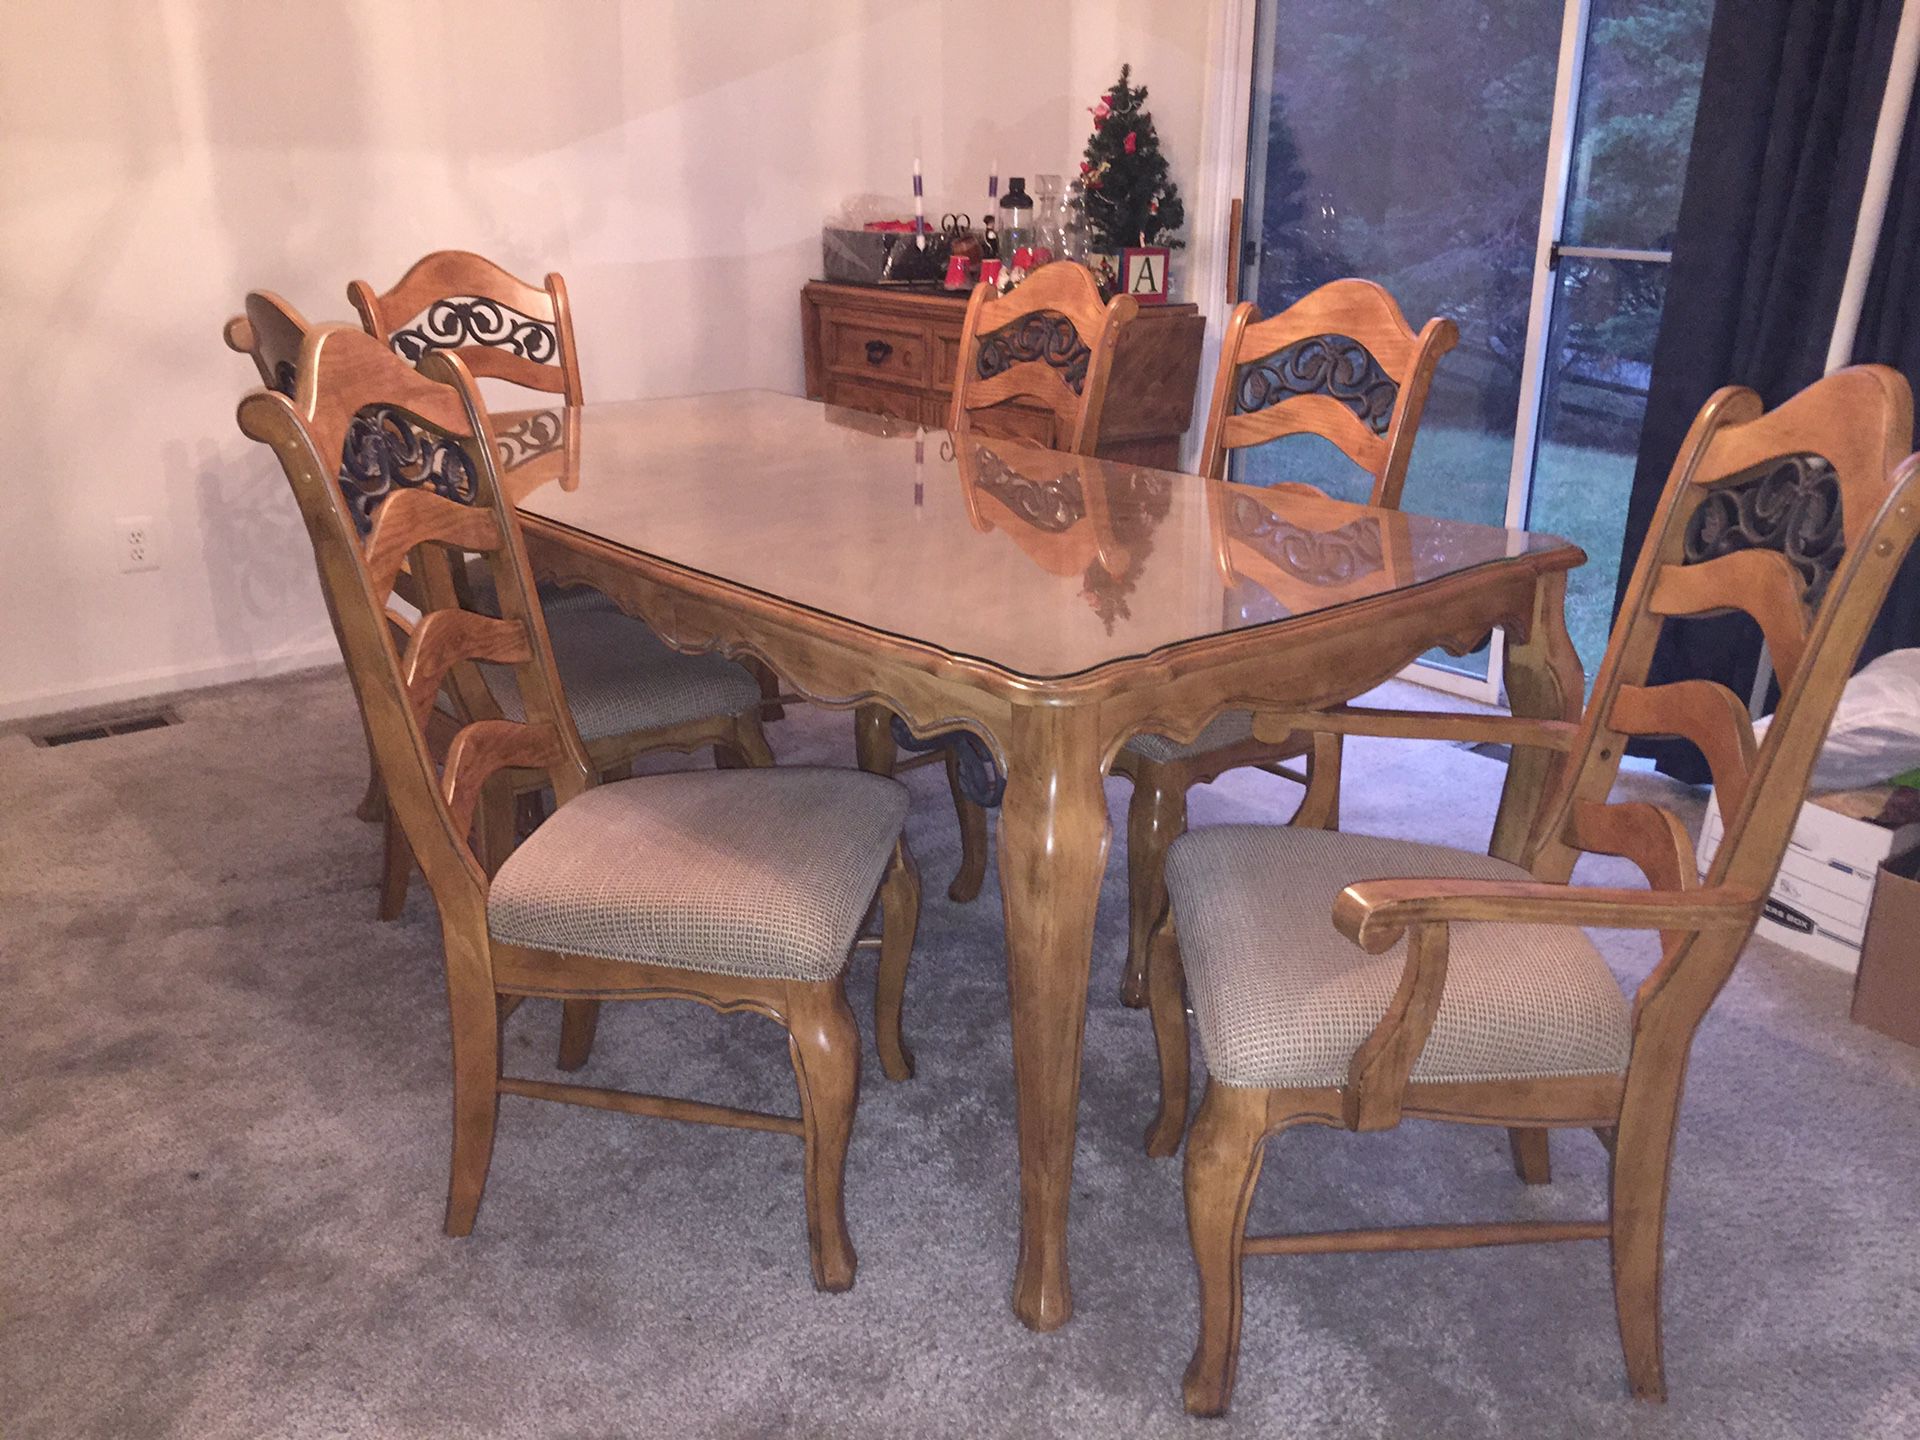 Dining table, chairs, and buffet